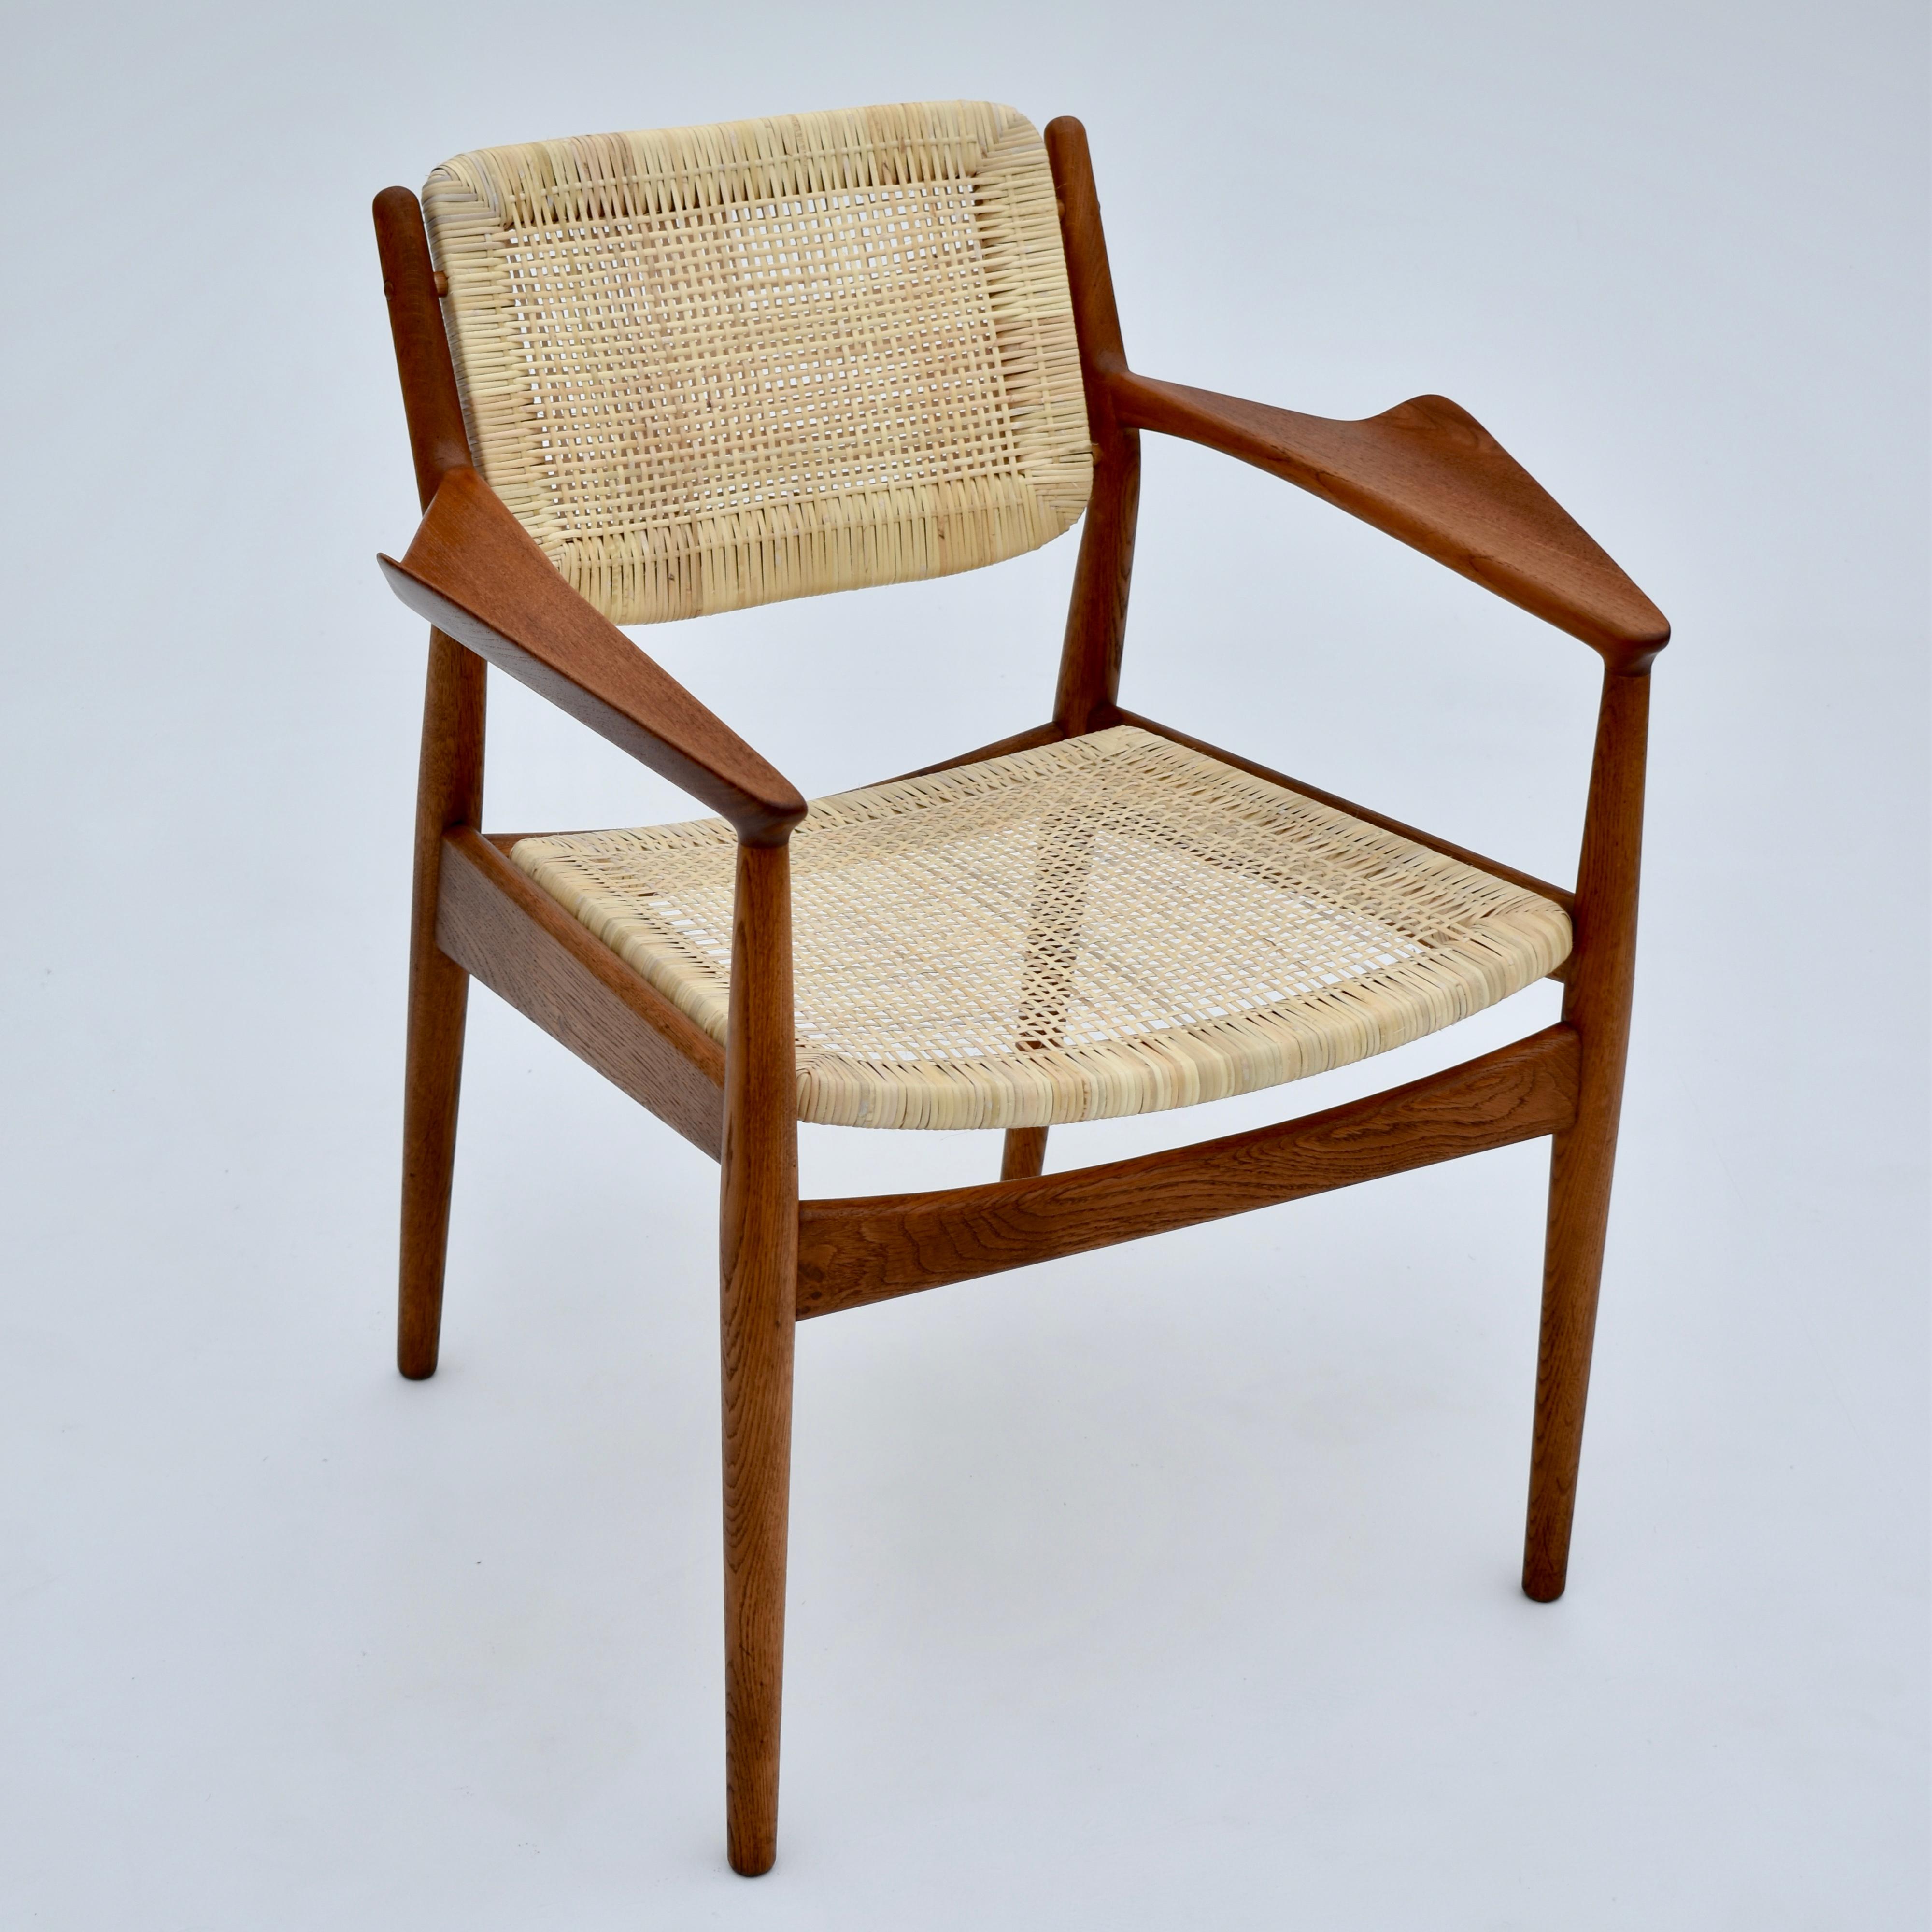 A personal favourite of ours, the model 51a is a very hard to find piece of design. Very few chairs can match the dramatic but delicate aesthetic of this design.

Constructed from solid oak with teak arms and newly woven Rattan seat and backrest,